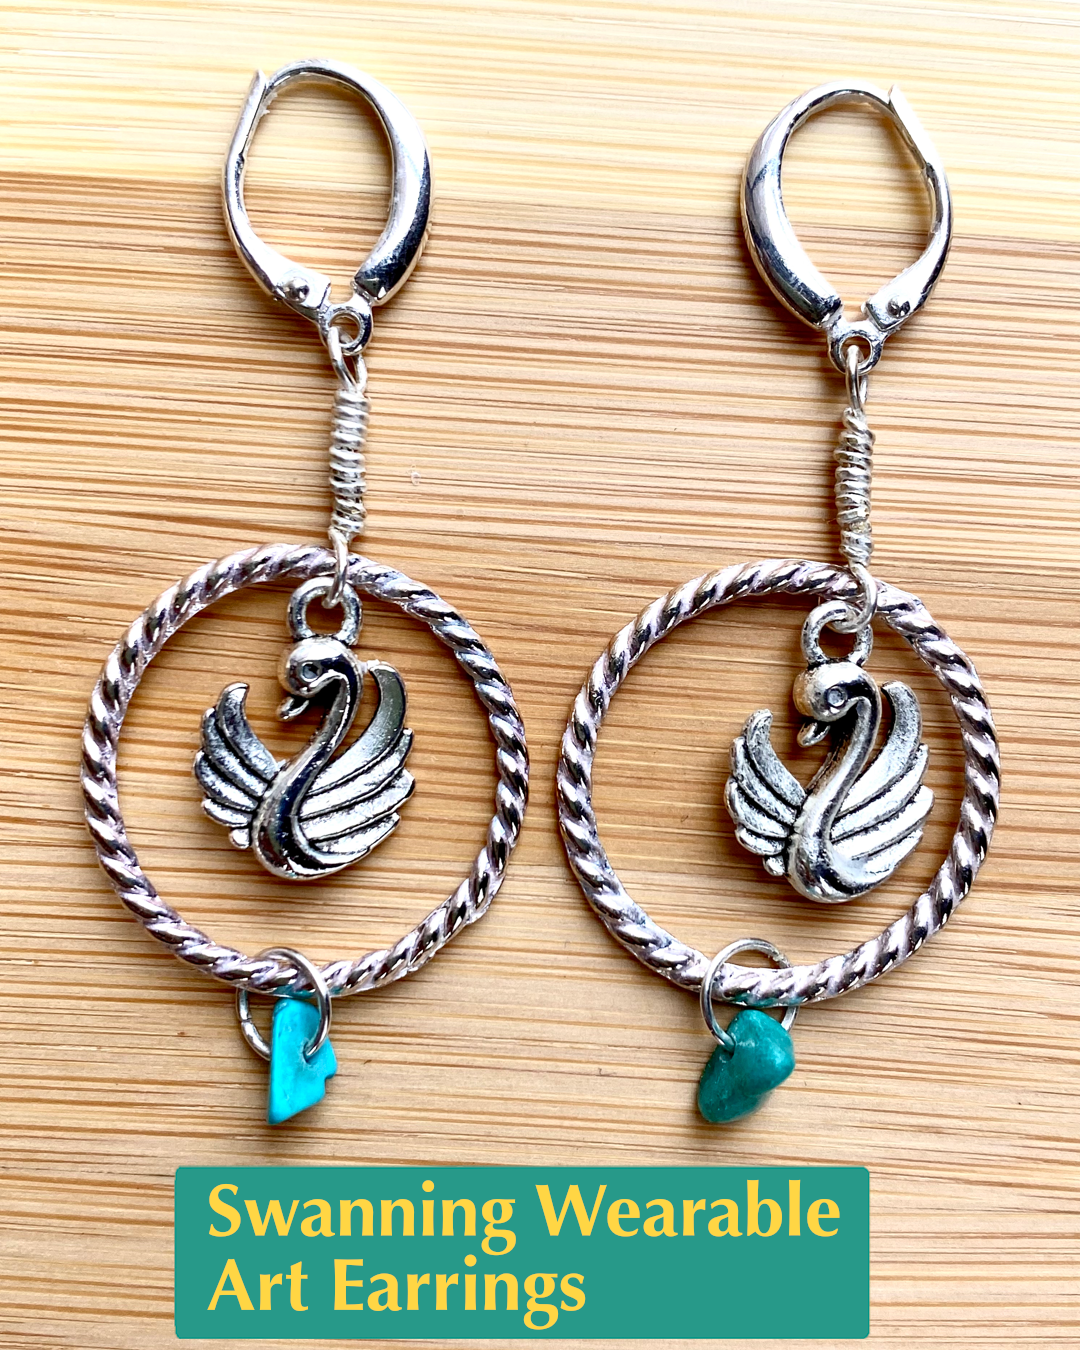 Handmade, wearable art silver hoop earrings featuring a silver swan charm and turquoise colored accent bead